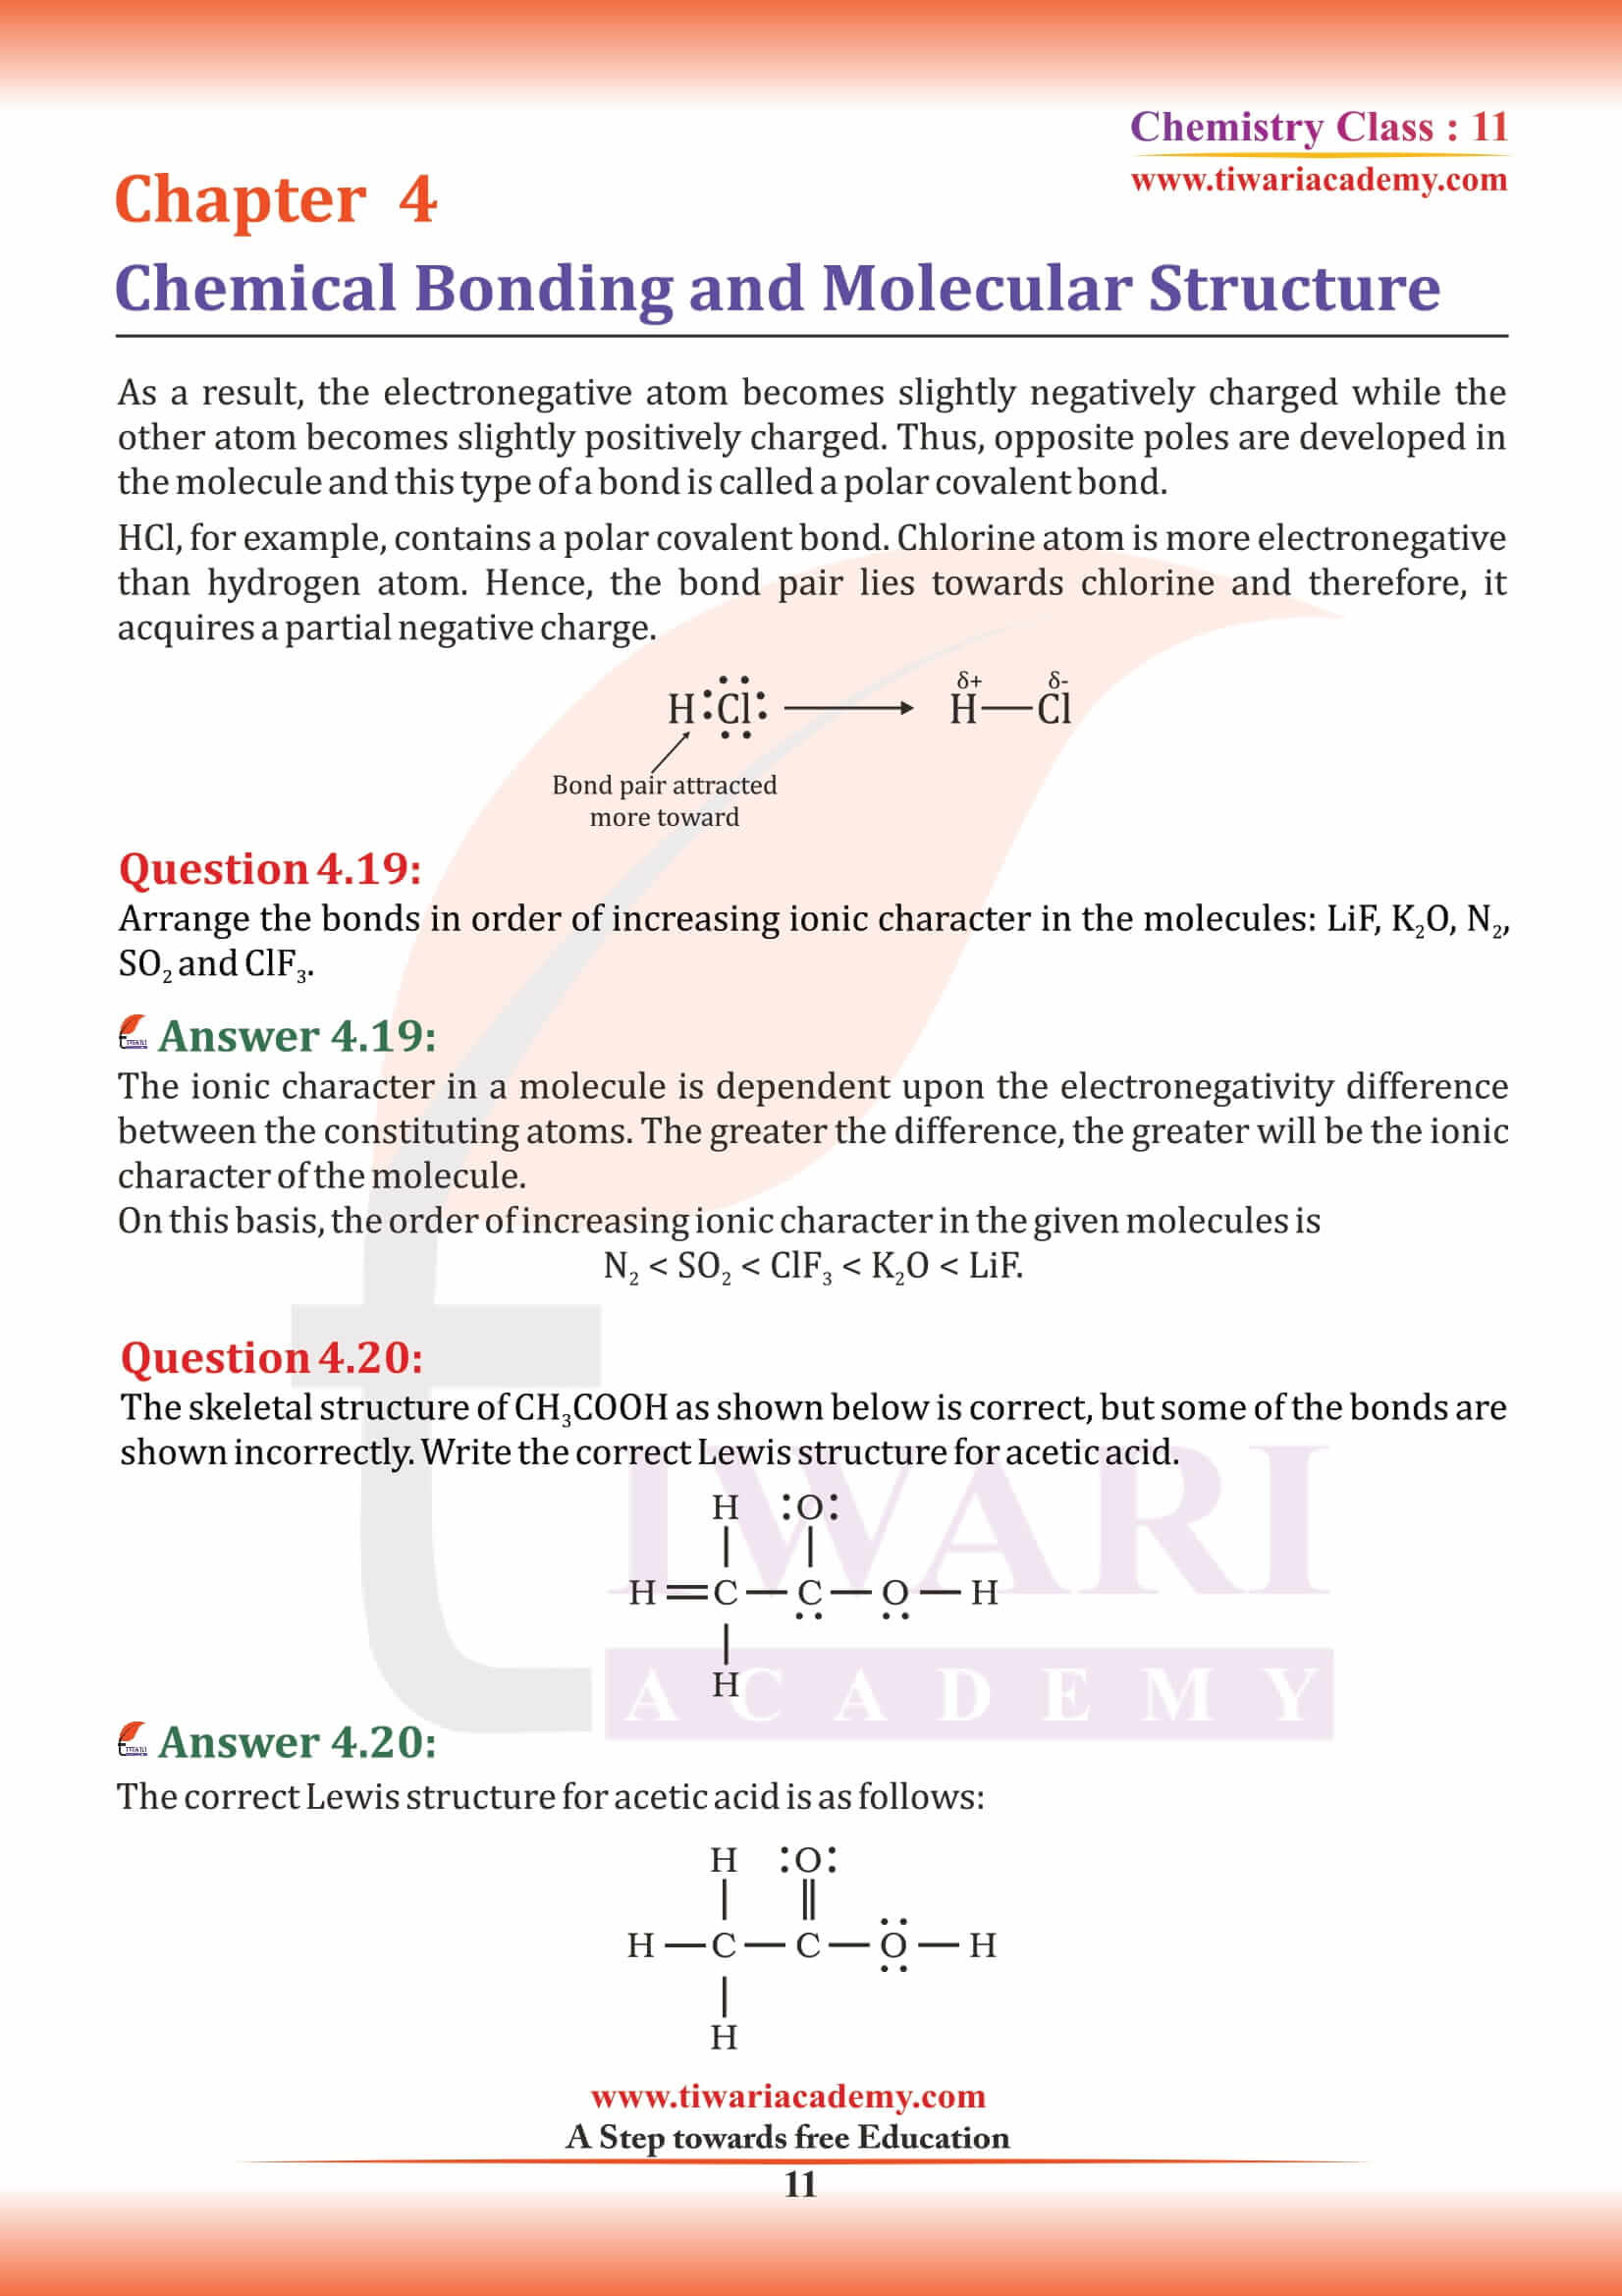 NCERT Solutions for Class 11 Chemistry Chapter 4 answers guide